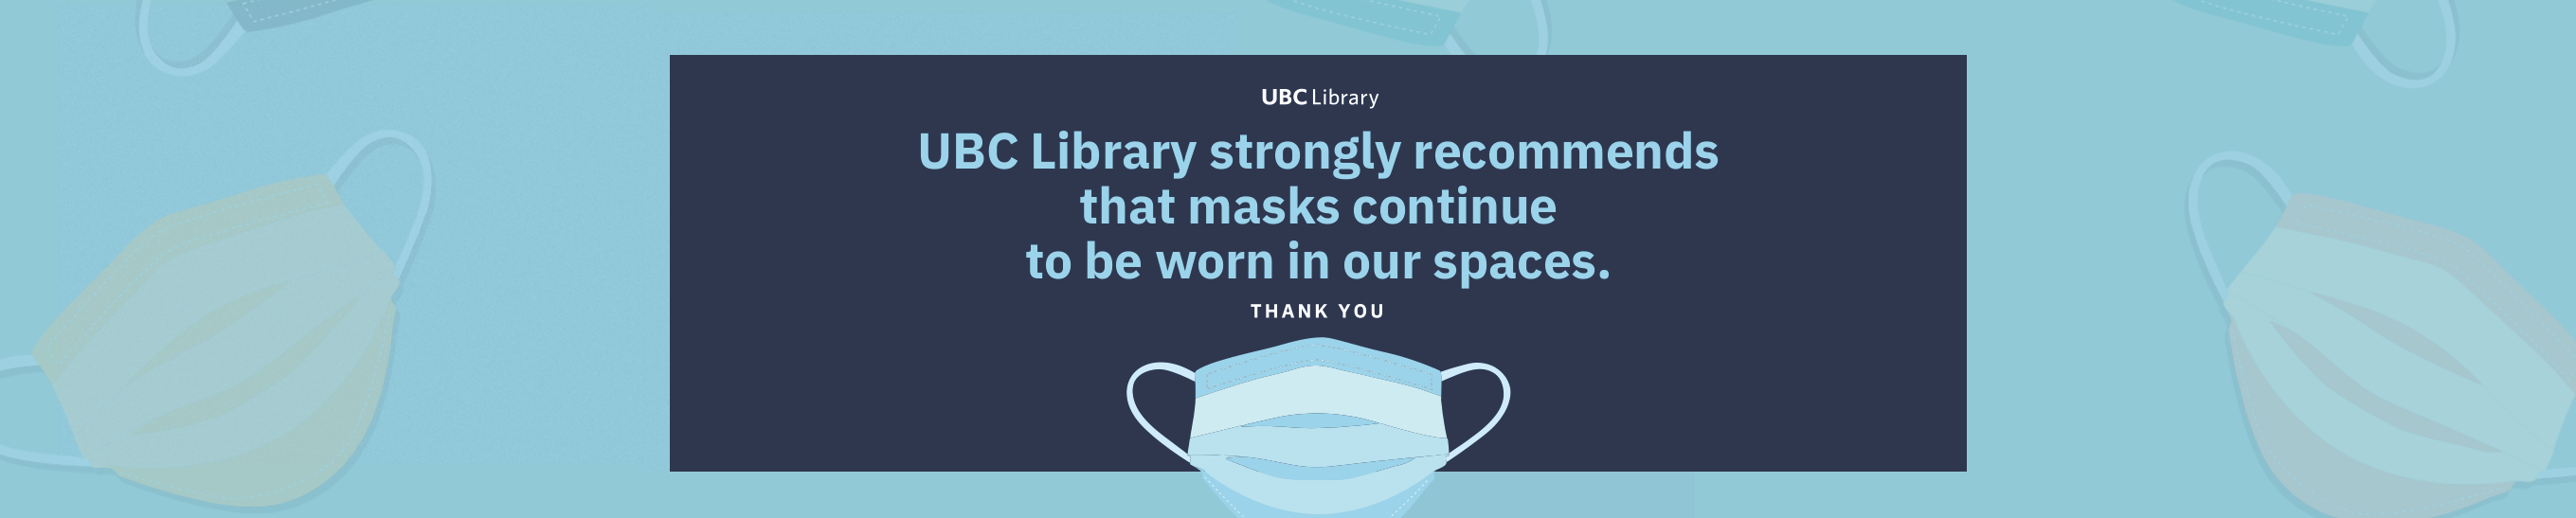 UBC Library strongly recommends that masks continue to be worn in our spaces. Thank you.